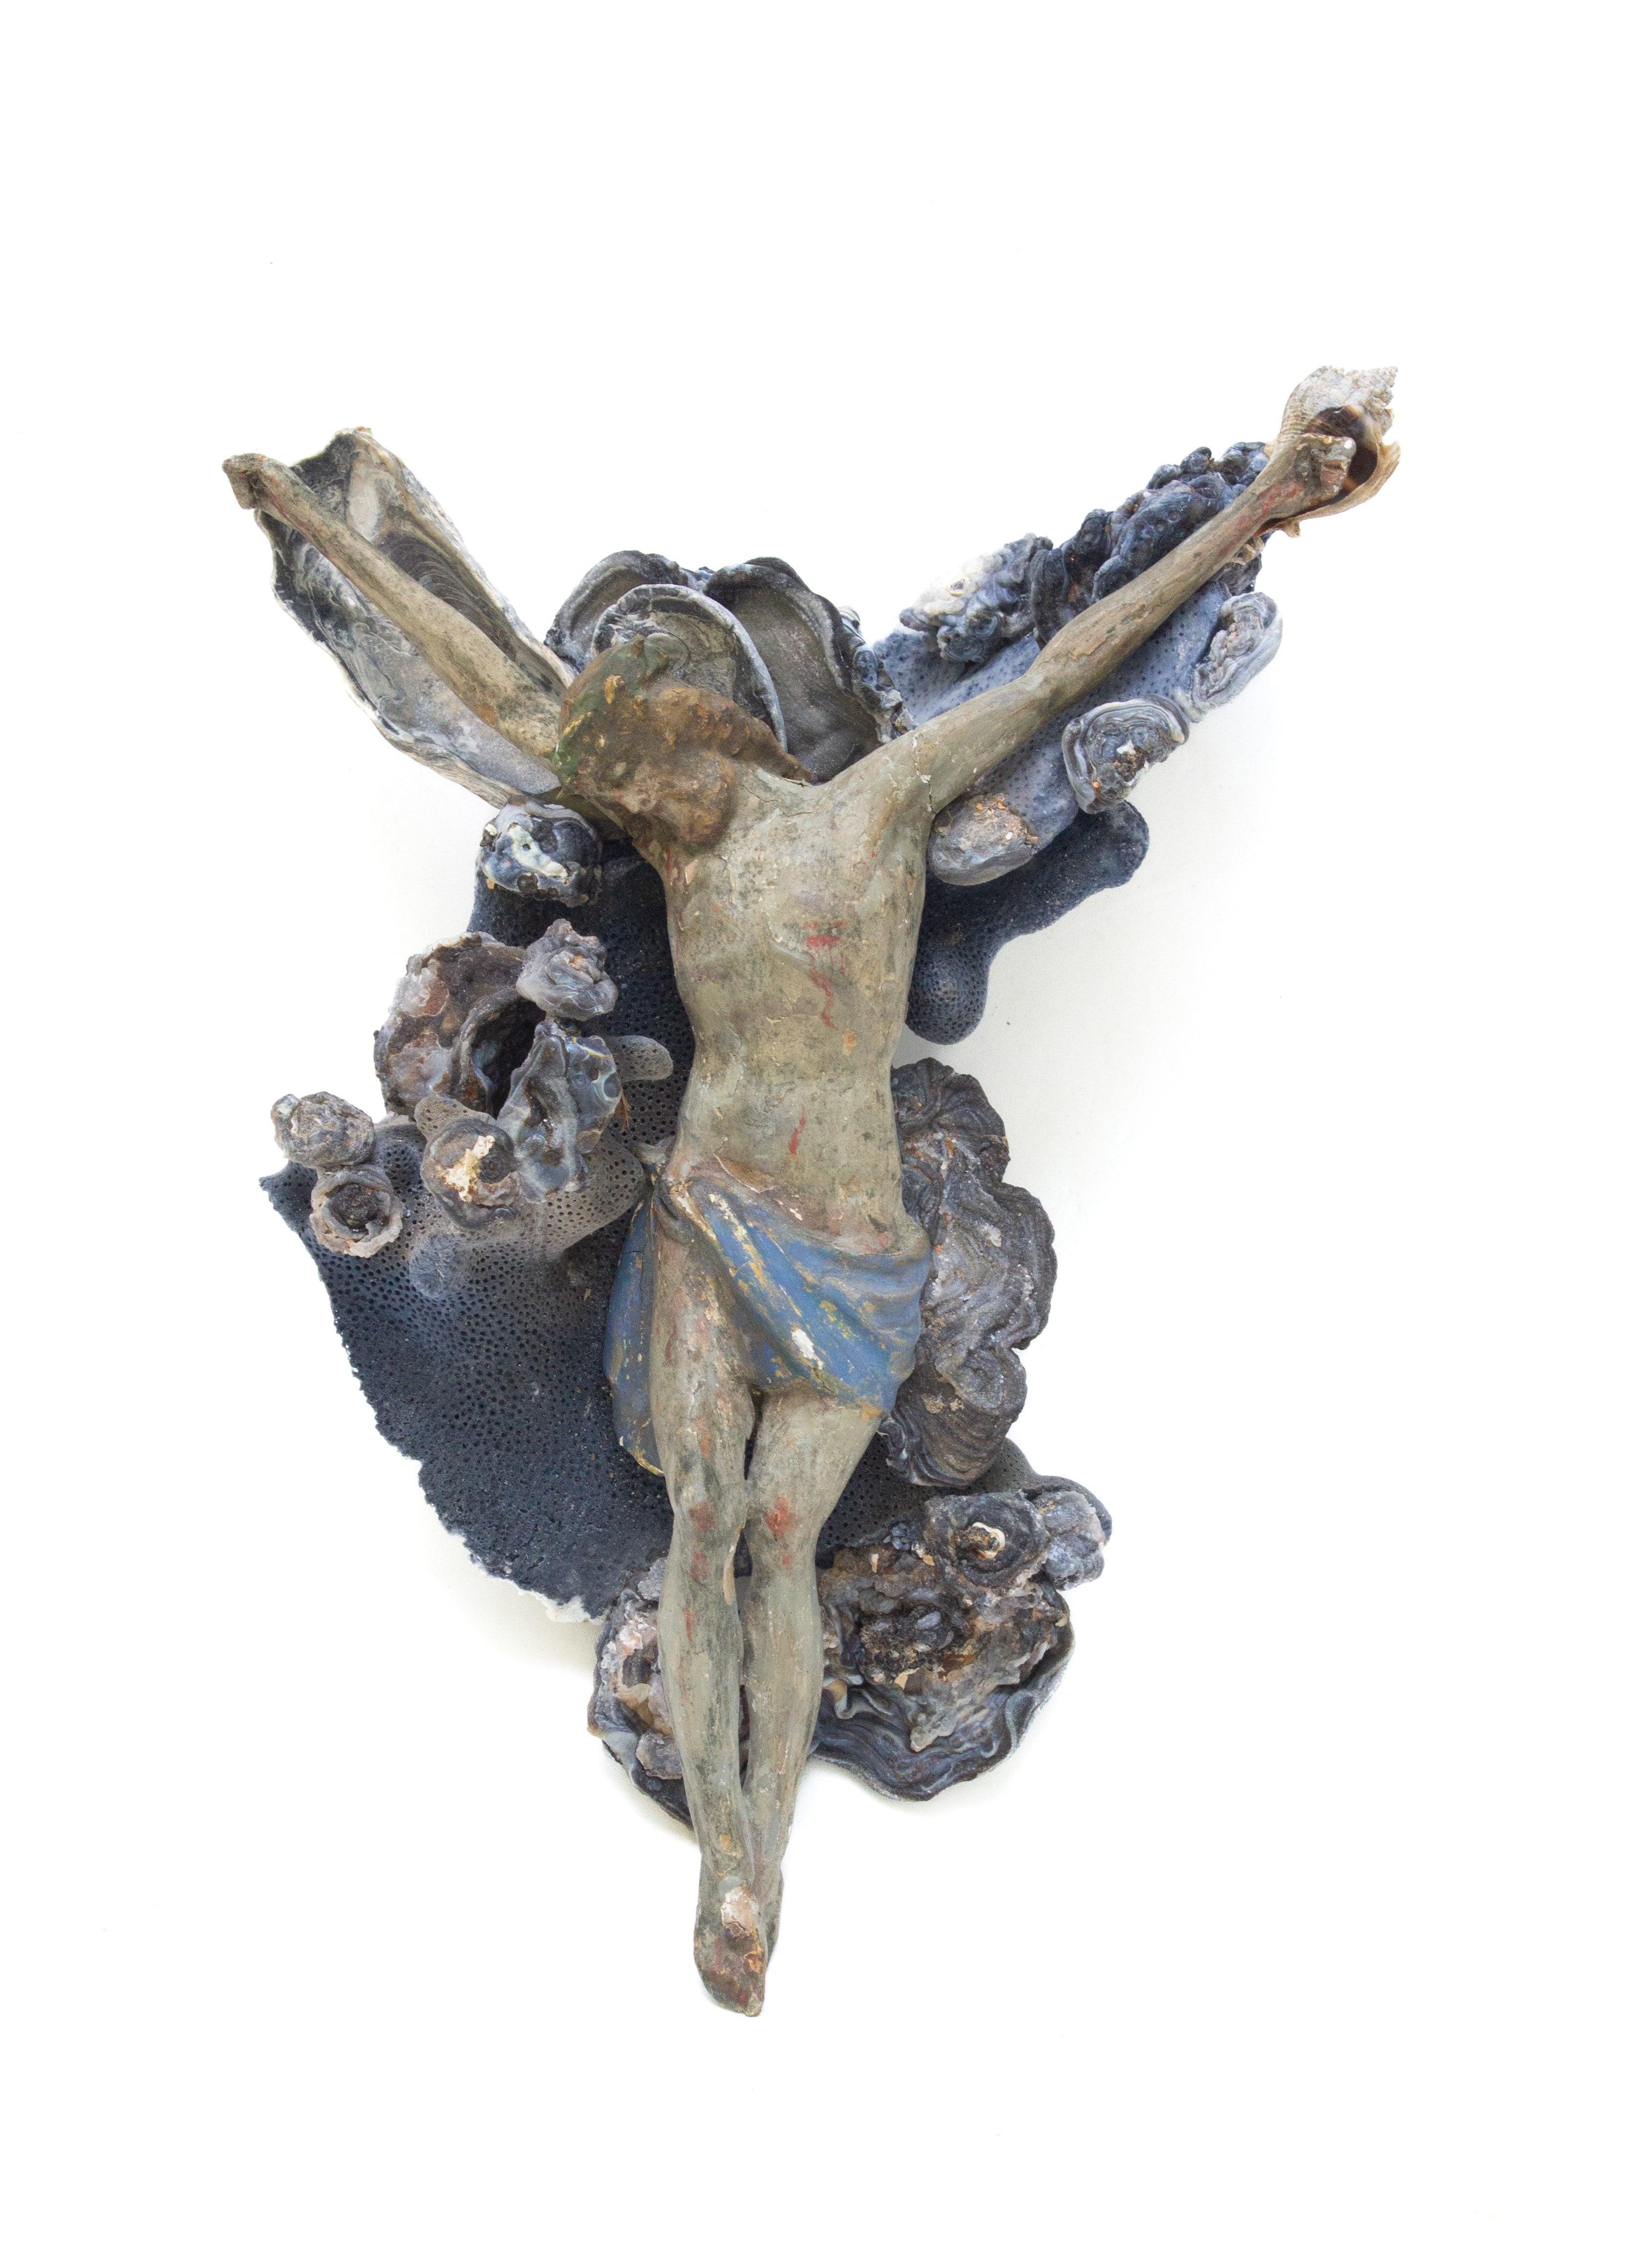 18th century Italian hand-carved figure of Christ wrapped in blue coral and chalcedonian rosettes. The figure of Christ originally came from a crucifix from a historic church in Tuscany. It is now a sculptural depiction that is reminicent of